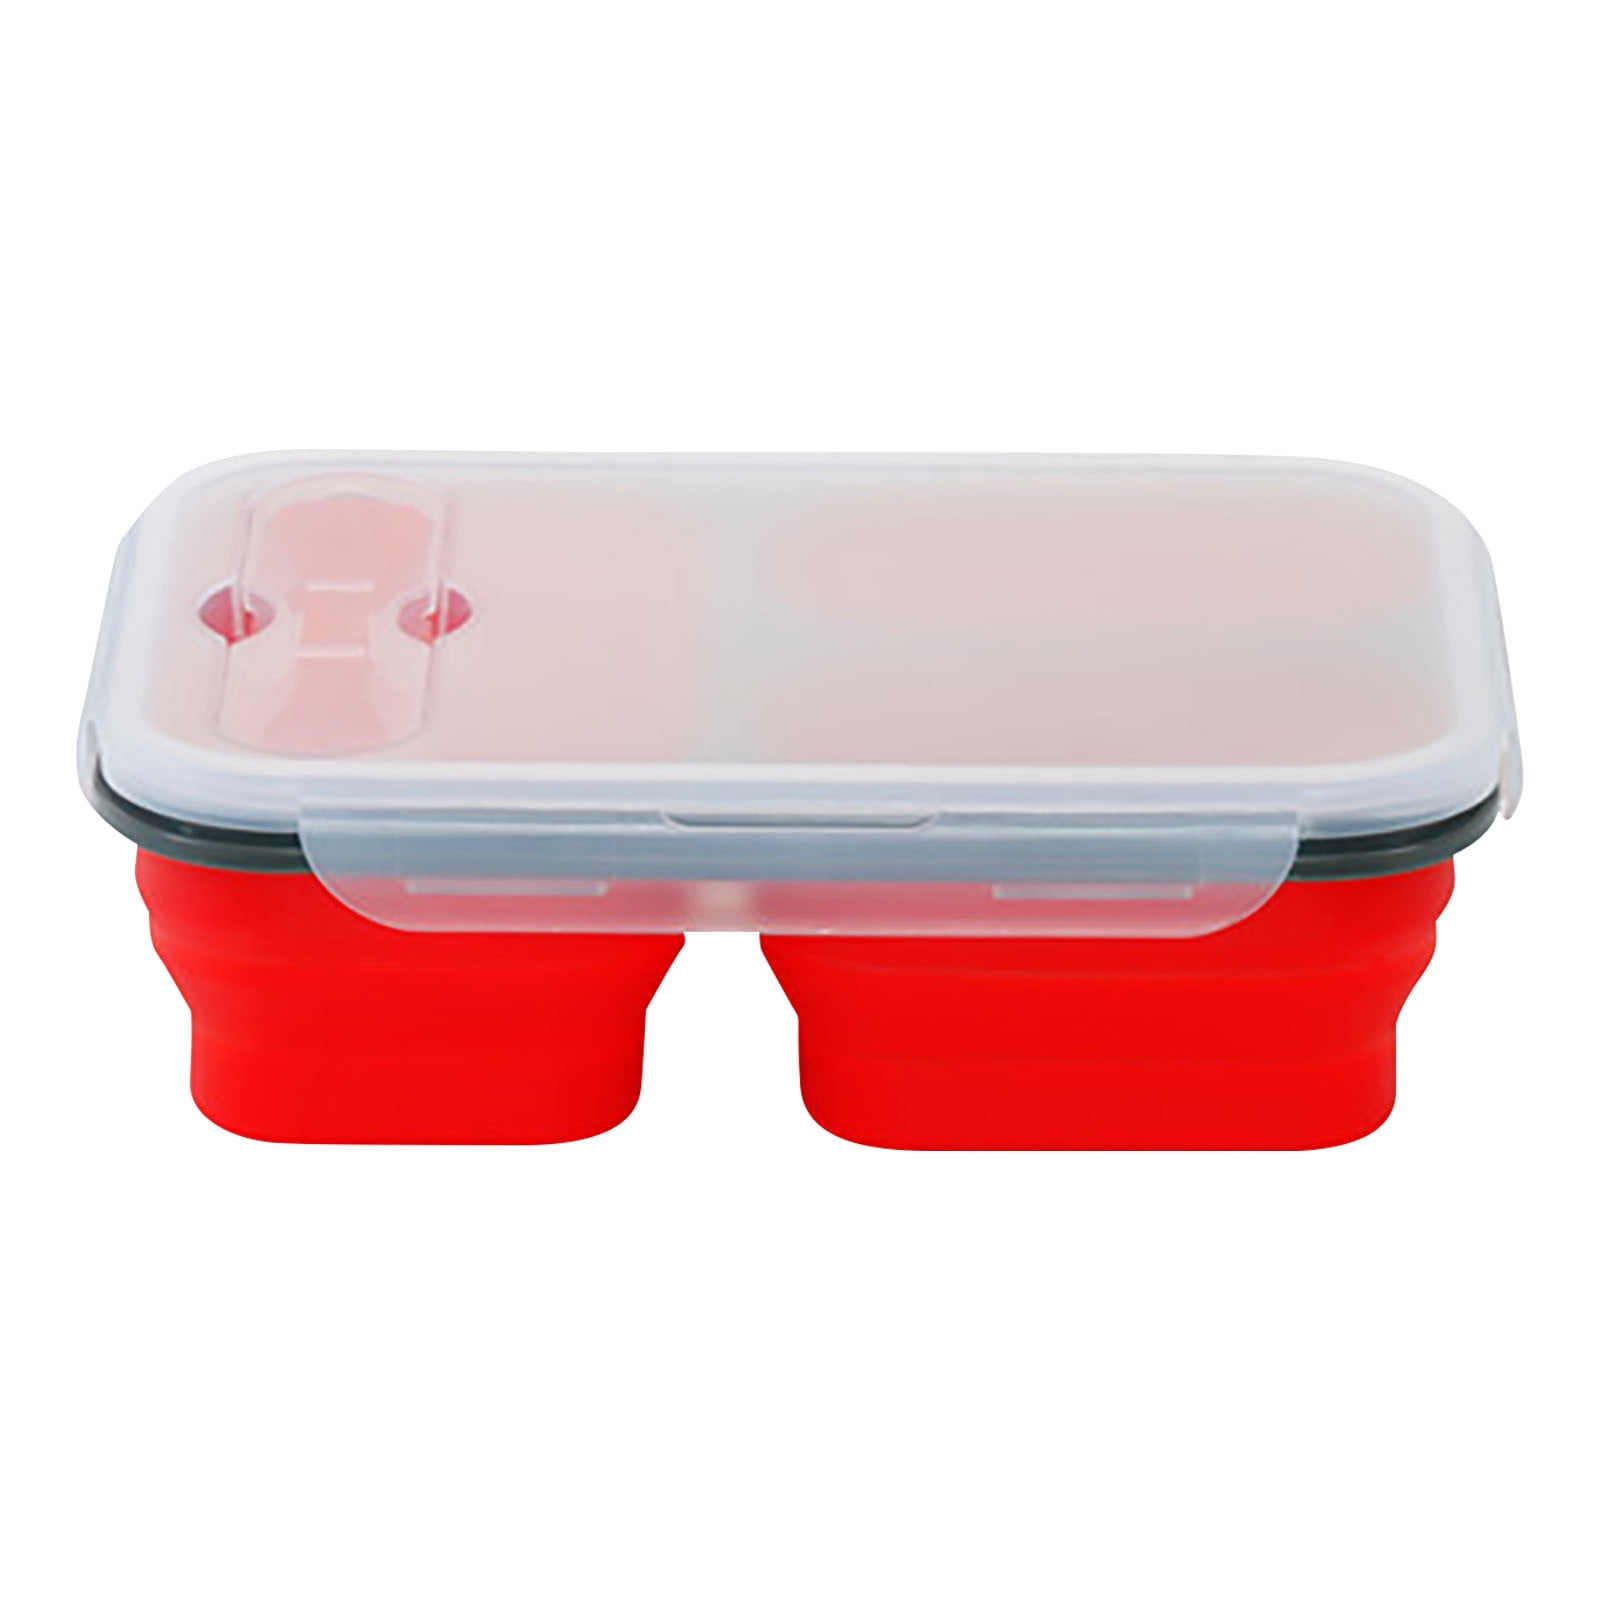 Ycolew Bento Lunch Box For Adults, Kids Leakproof Meal Prep Portion Control Boxes  Japanese Style for Boys Girls Teens 3 Removable Compartment Slim Container  